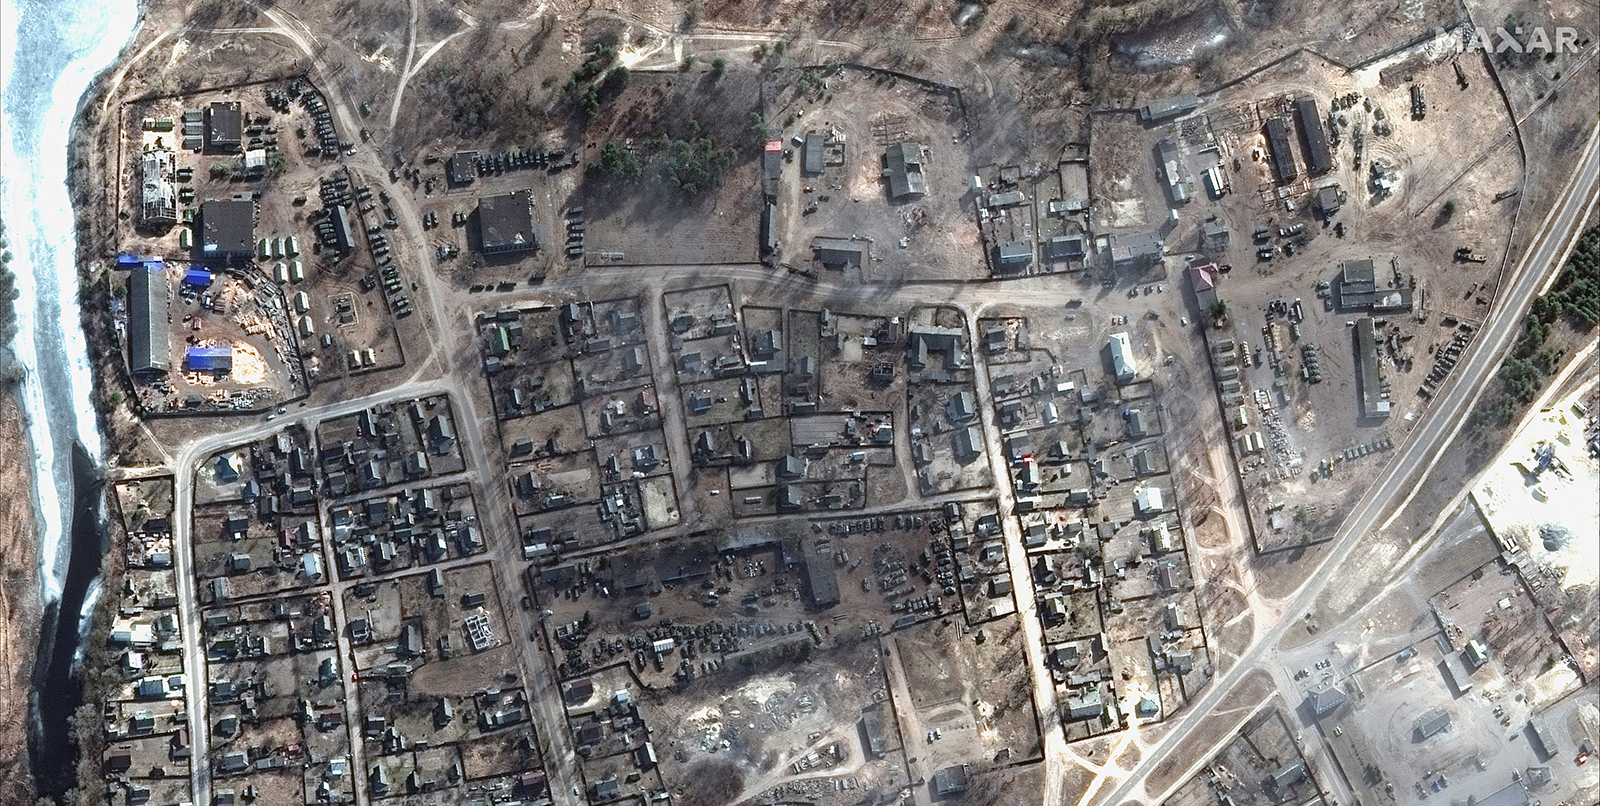 A satellite image shows an overview of a military compound in Naroulia, Belarus, on March 14.